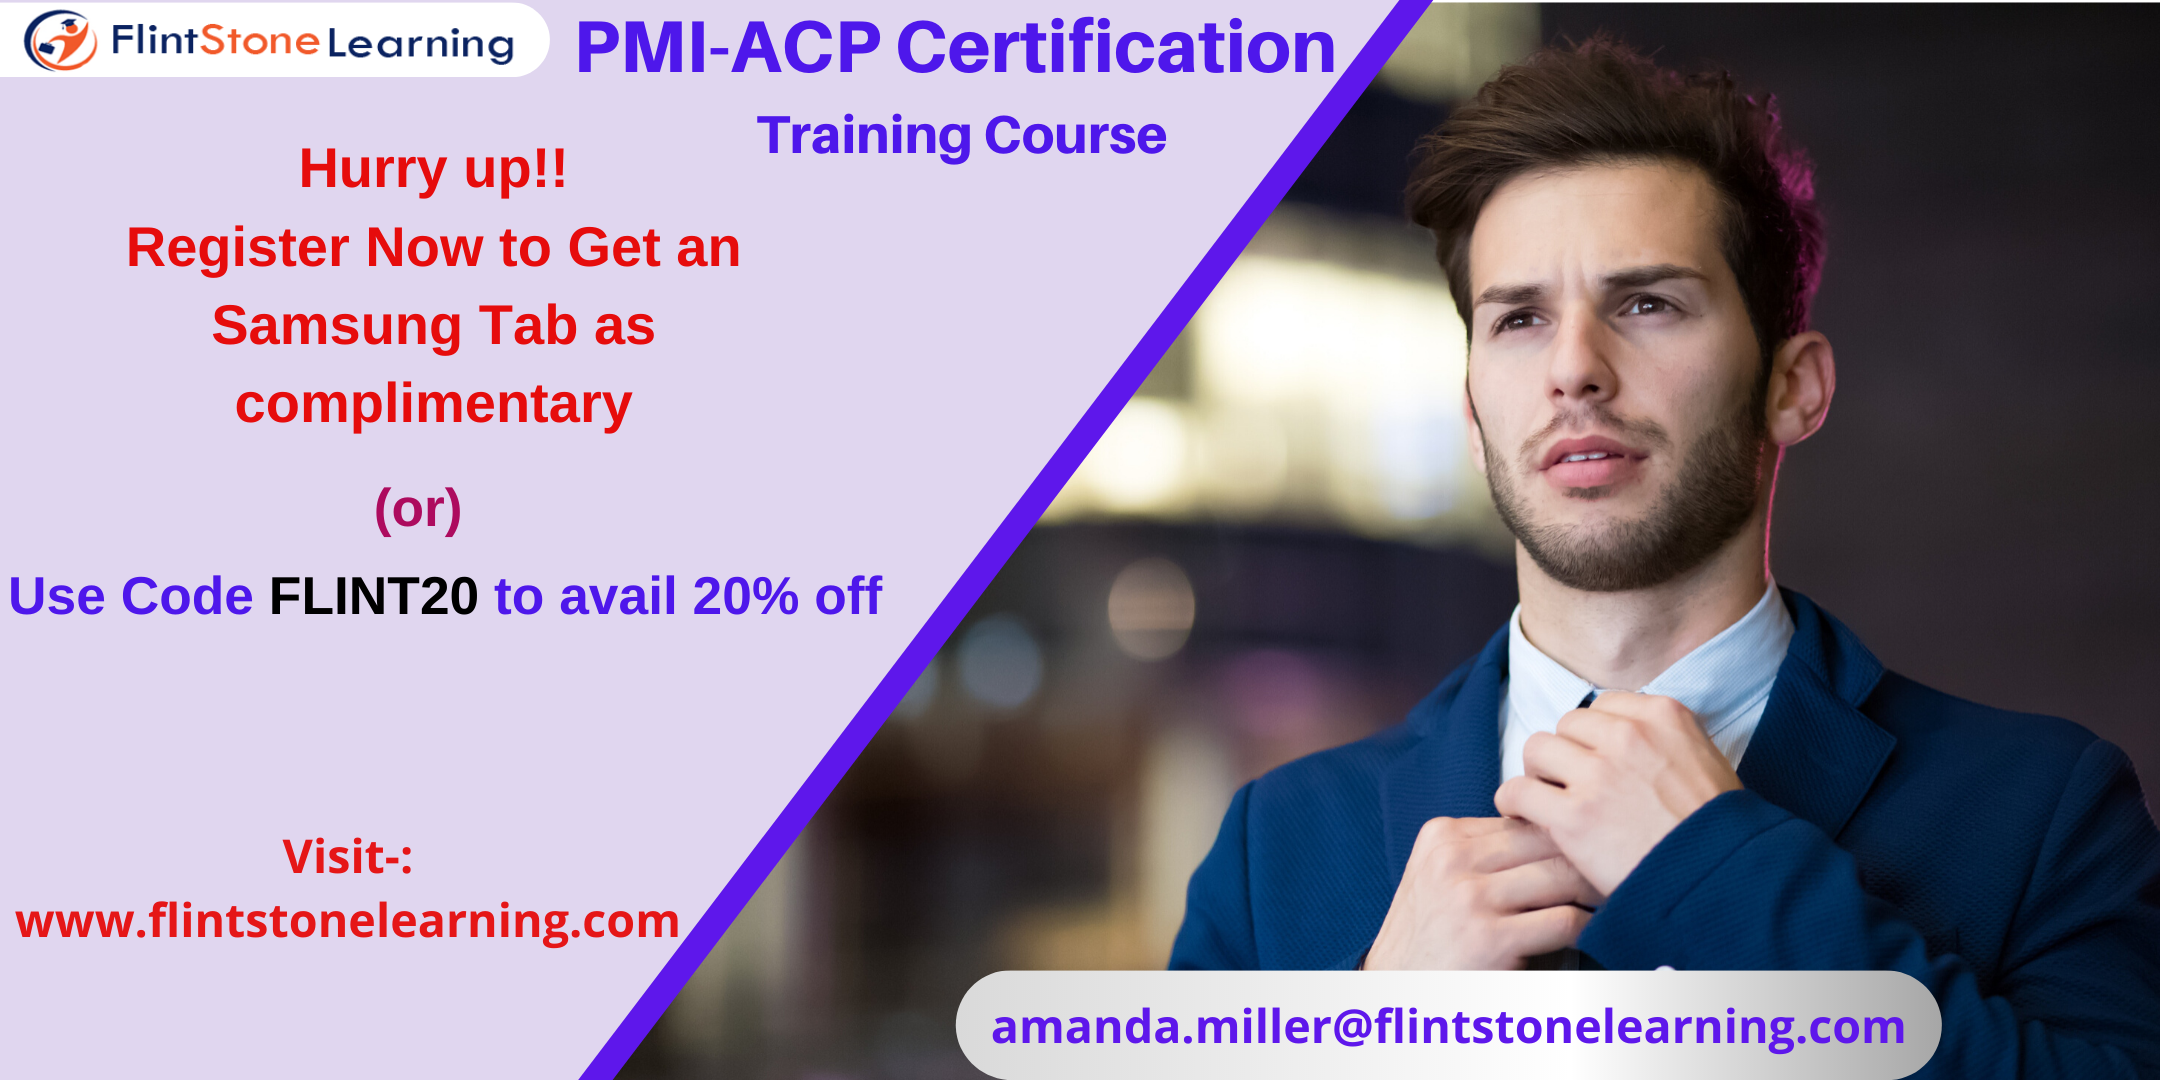 PMI-ACP Certification Training Course in Arvada, CO